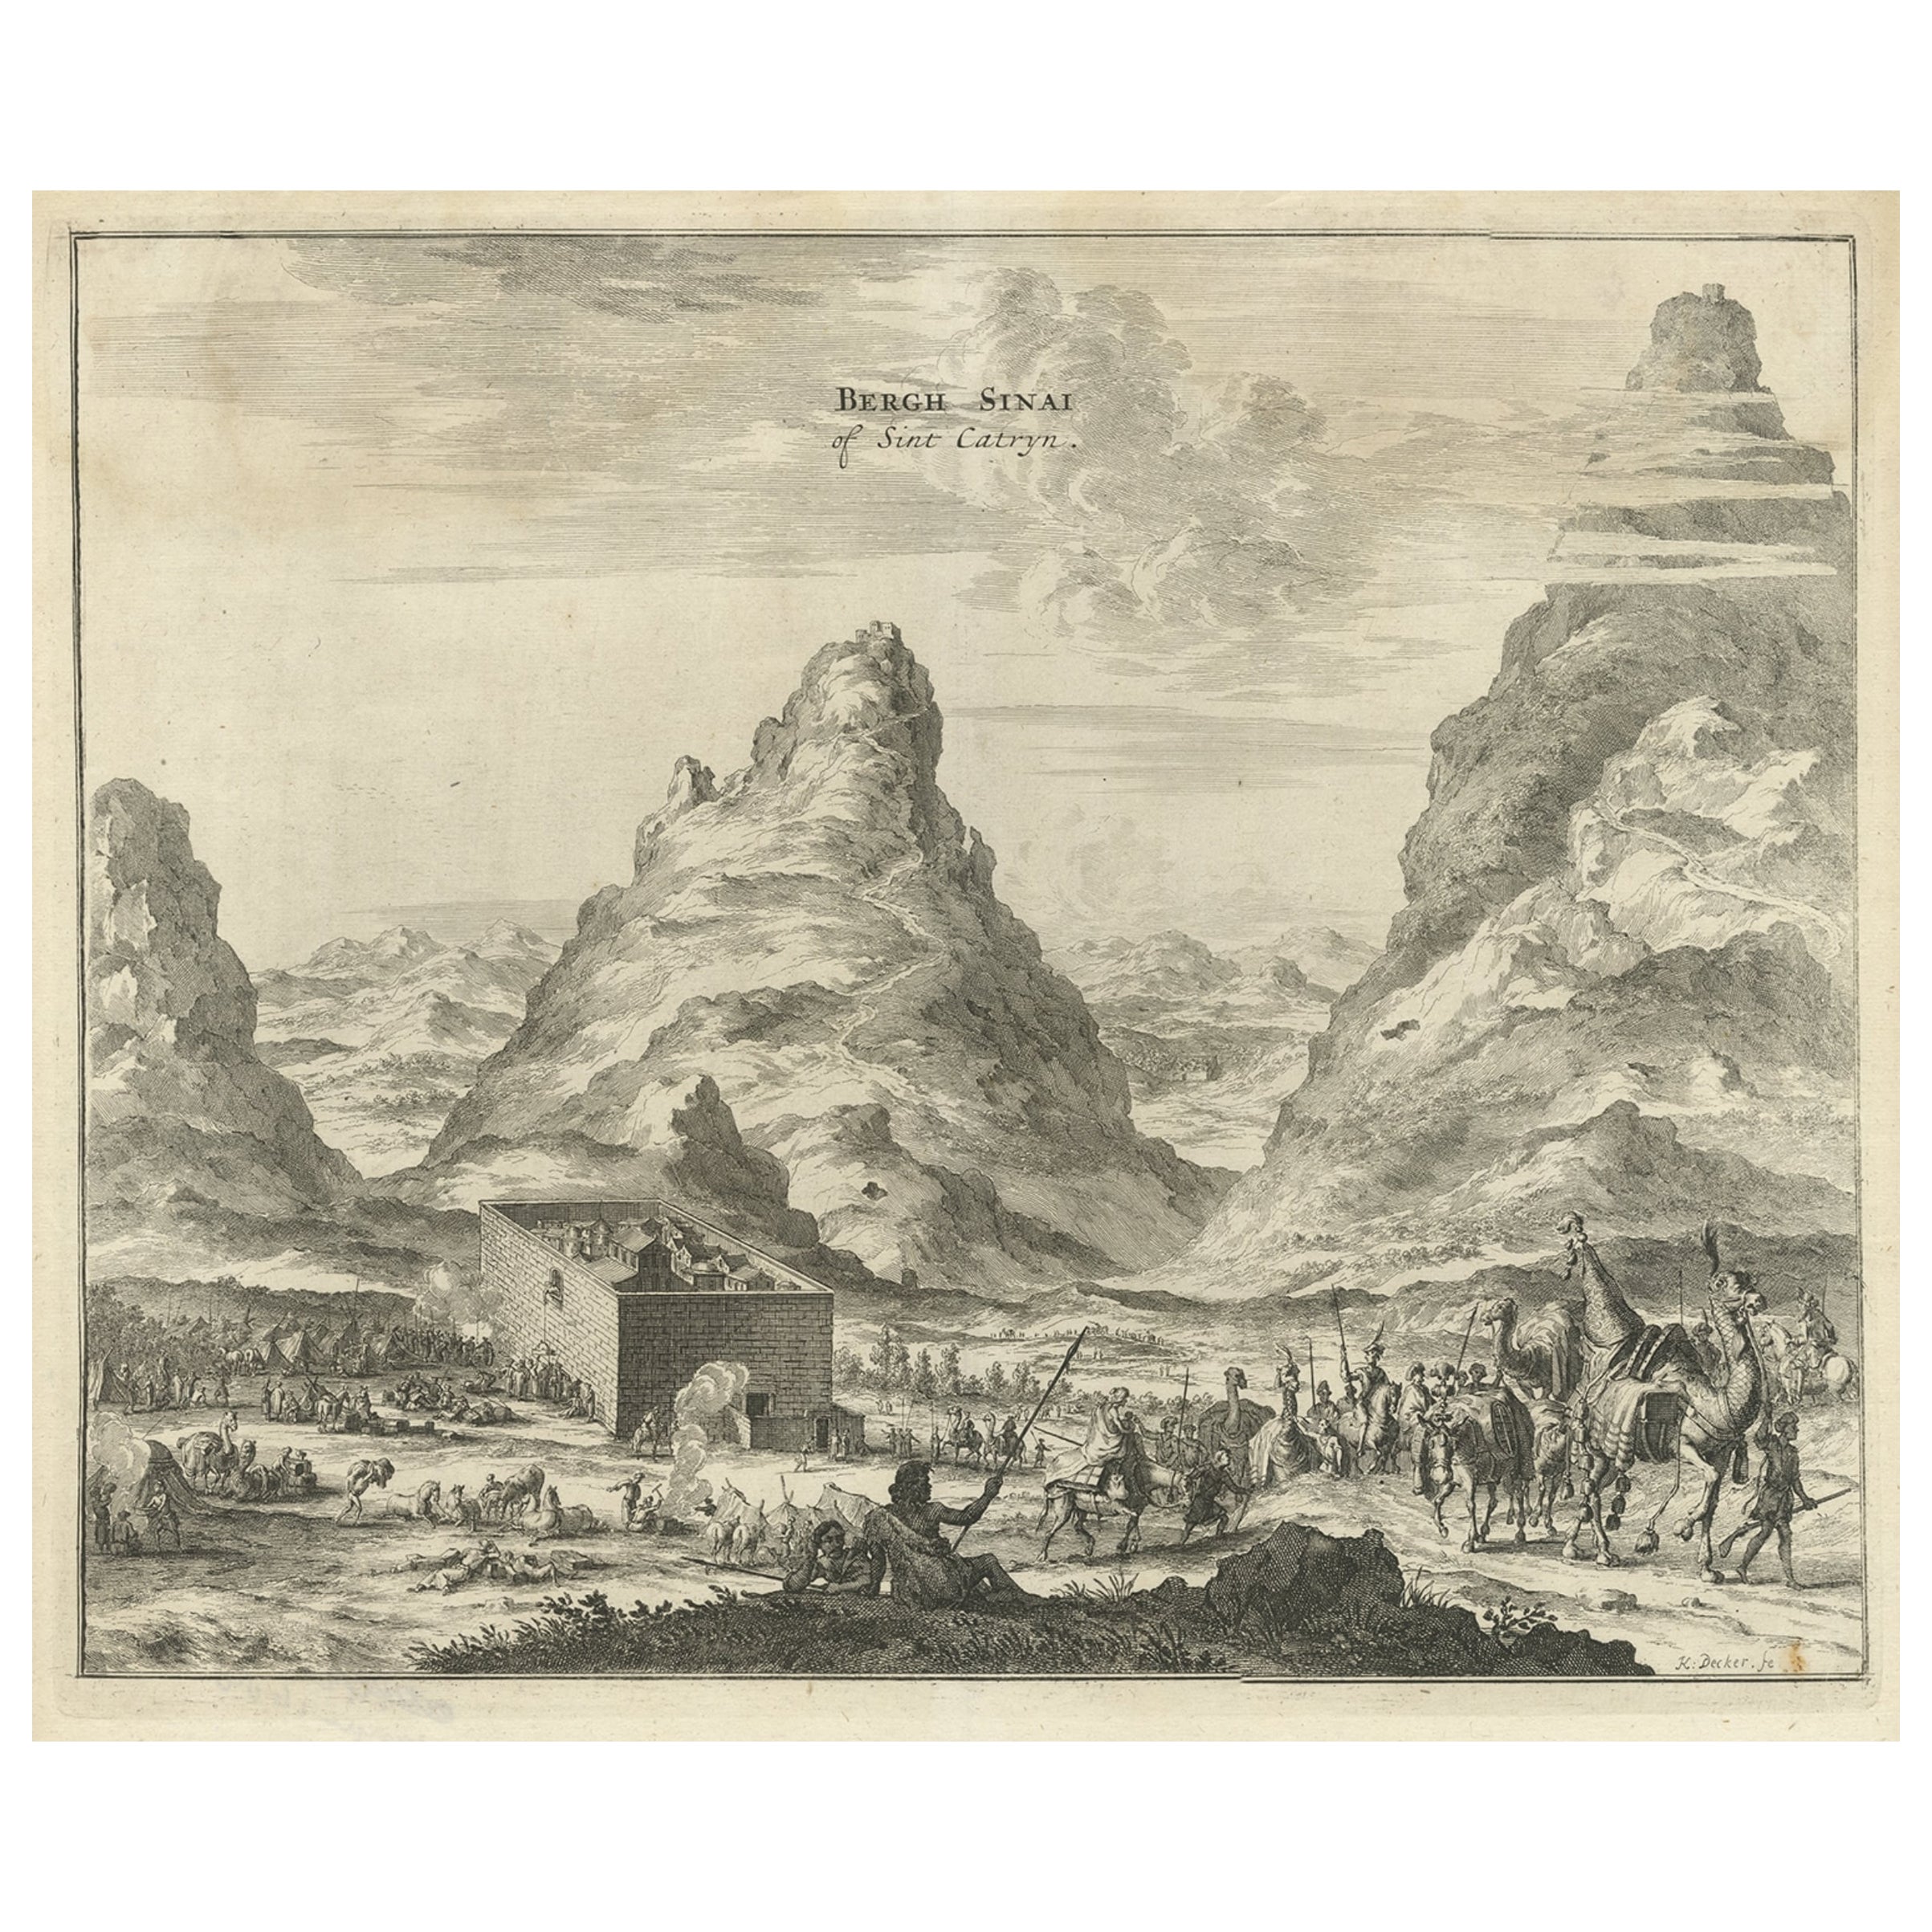 Rare Engraving of Mount Sinai with St. Catherine's Monastery and Bedouins, 1680